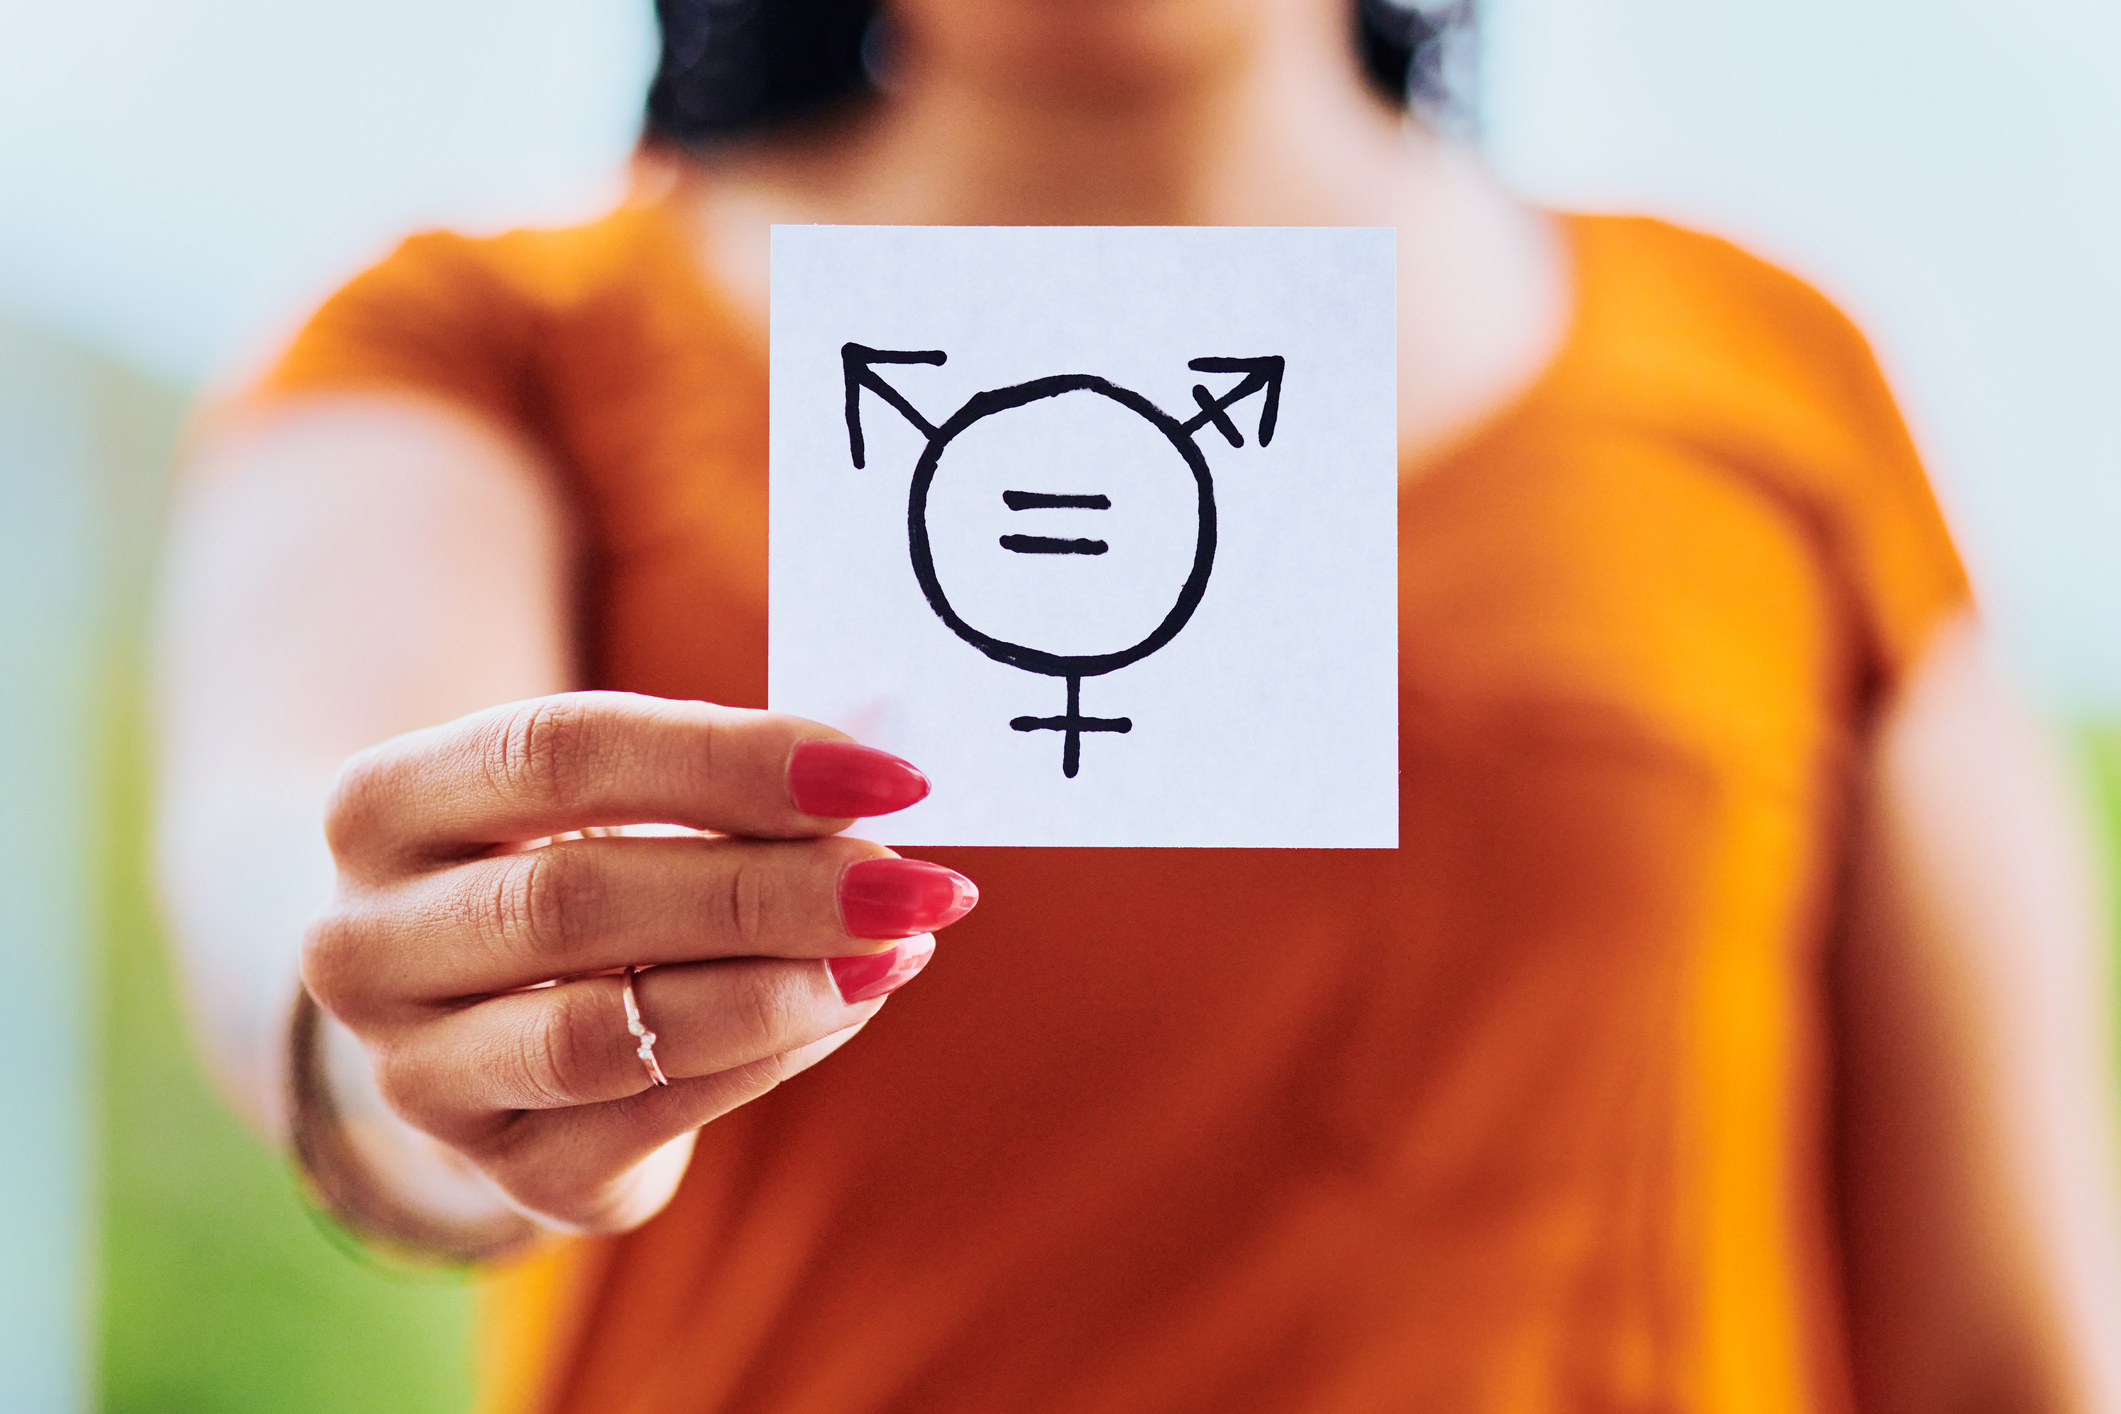 Person holding up drawing of transgender symbol with male, female, and combined symbols